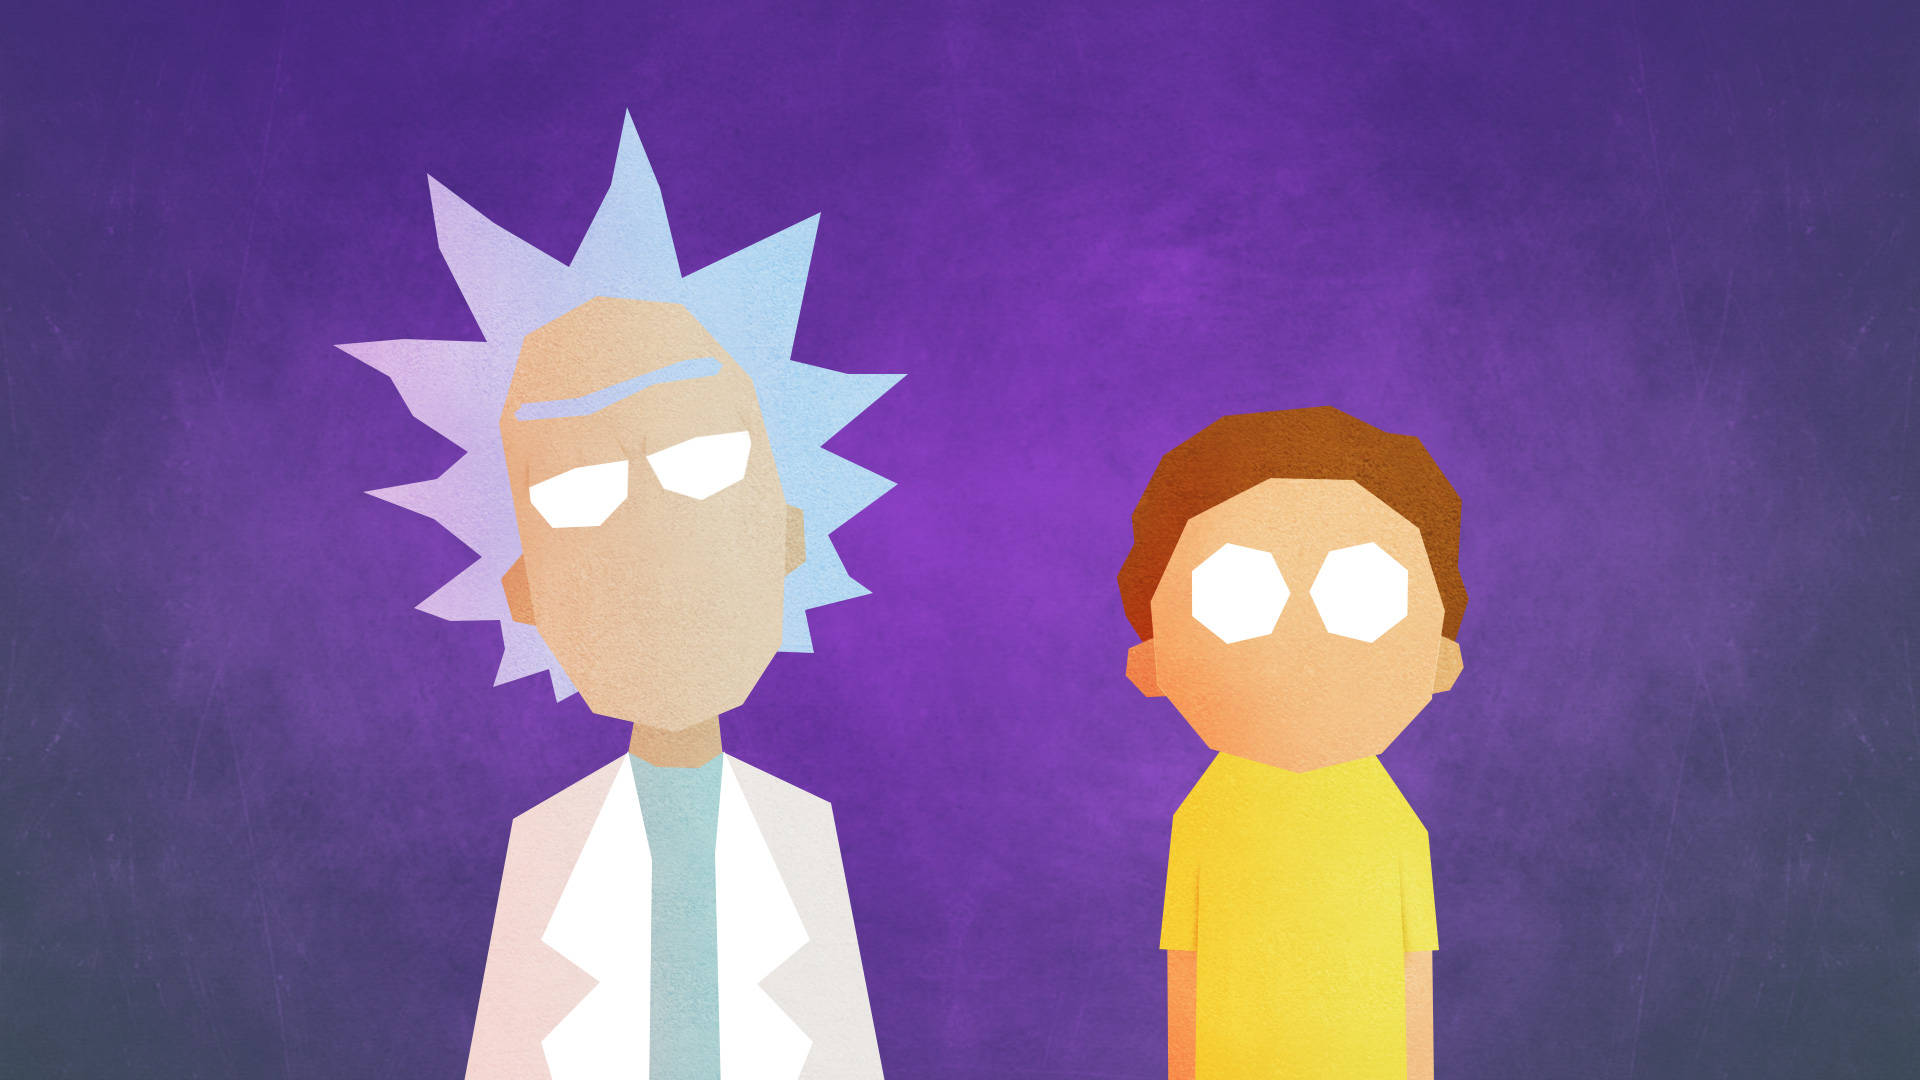 Dope Rick And Marty Digital Art Background